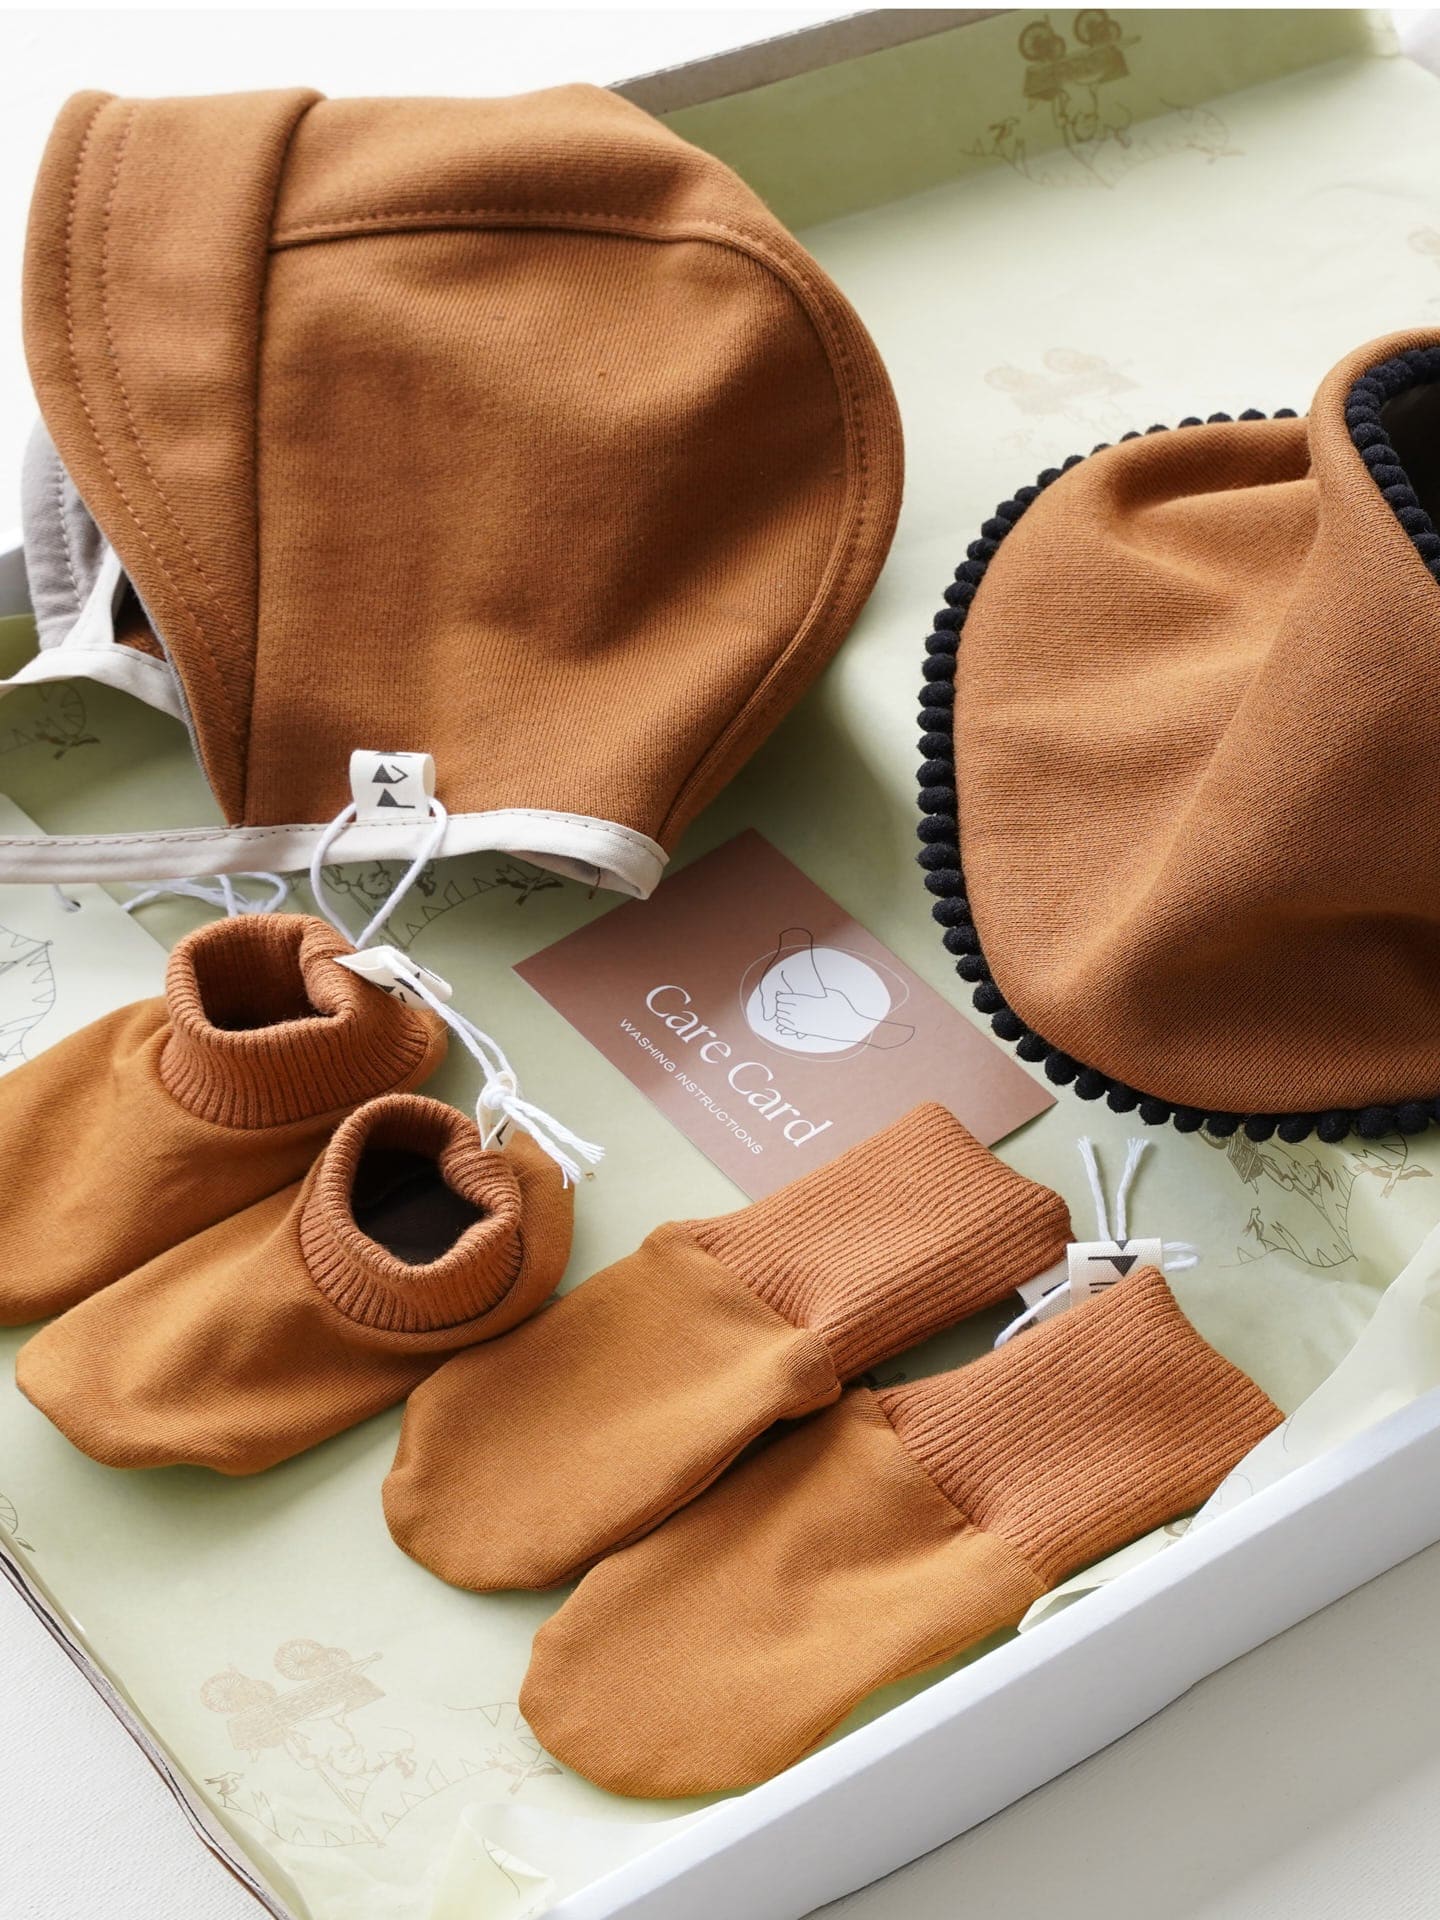 A Baby Gift Box - Copper, Peppin hat, mittens and booties are in a box.